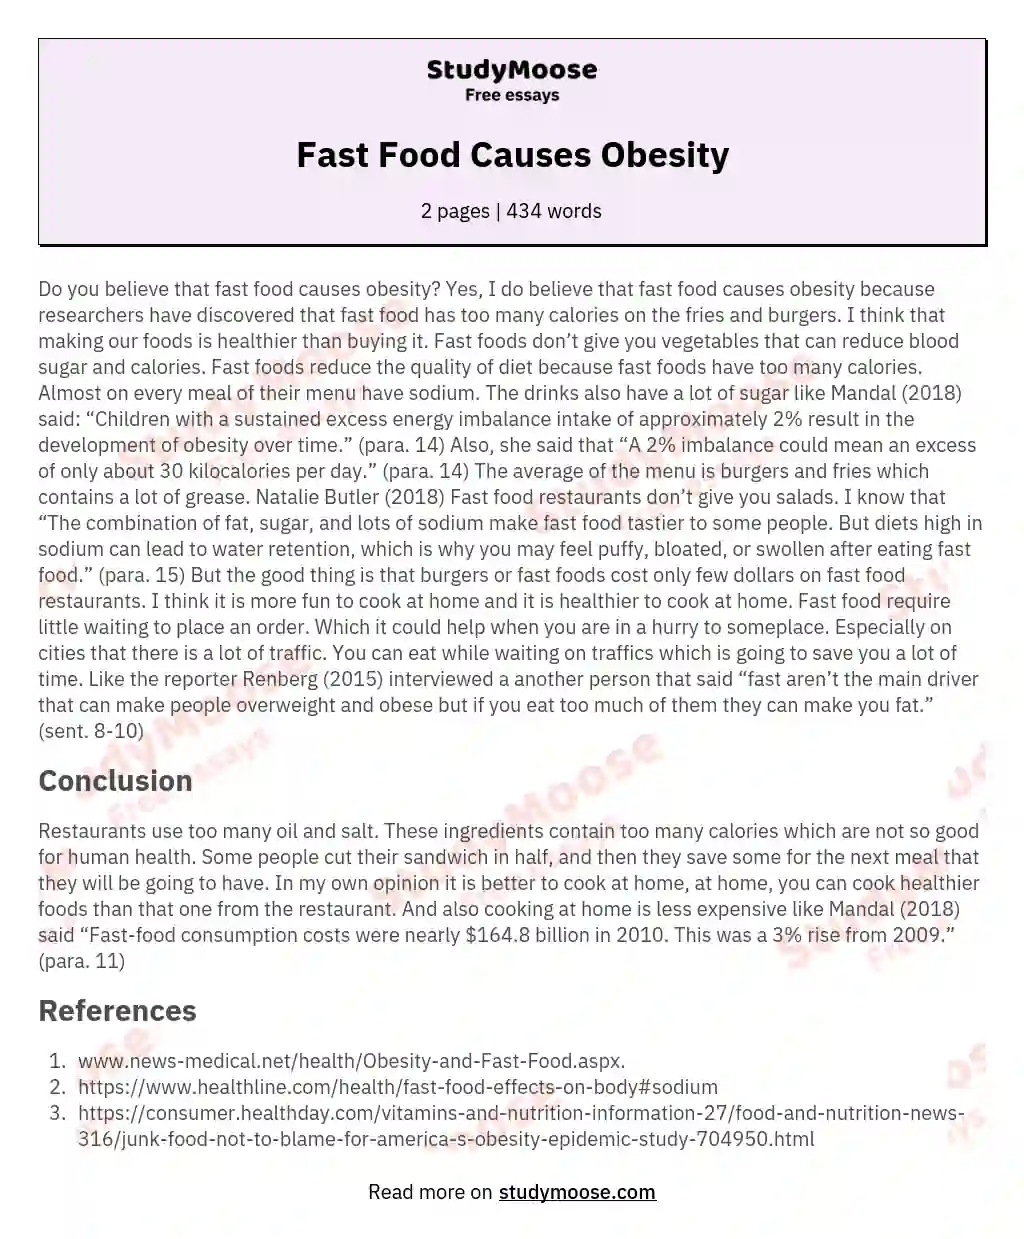 Fast Food Causes Obesity